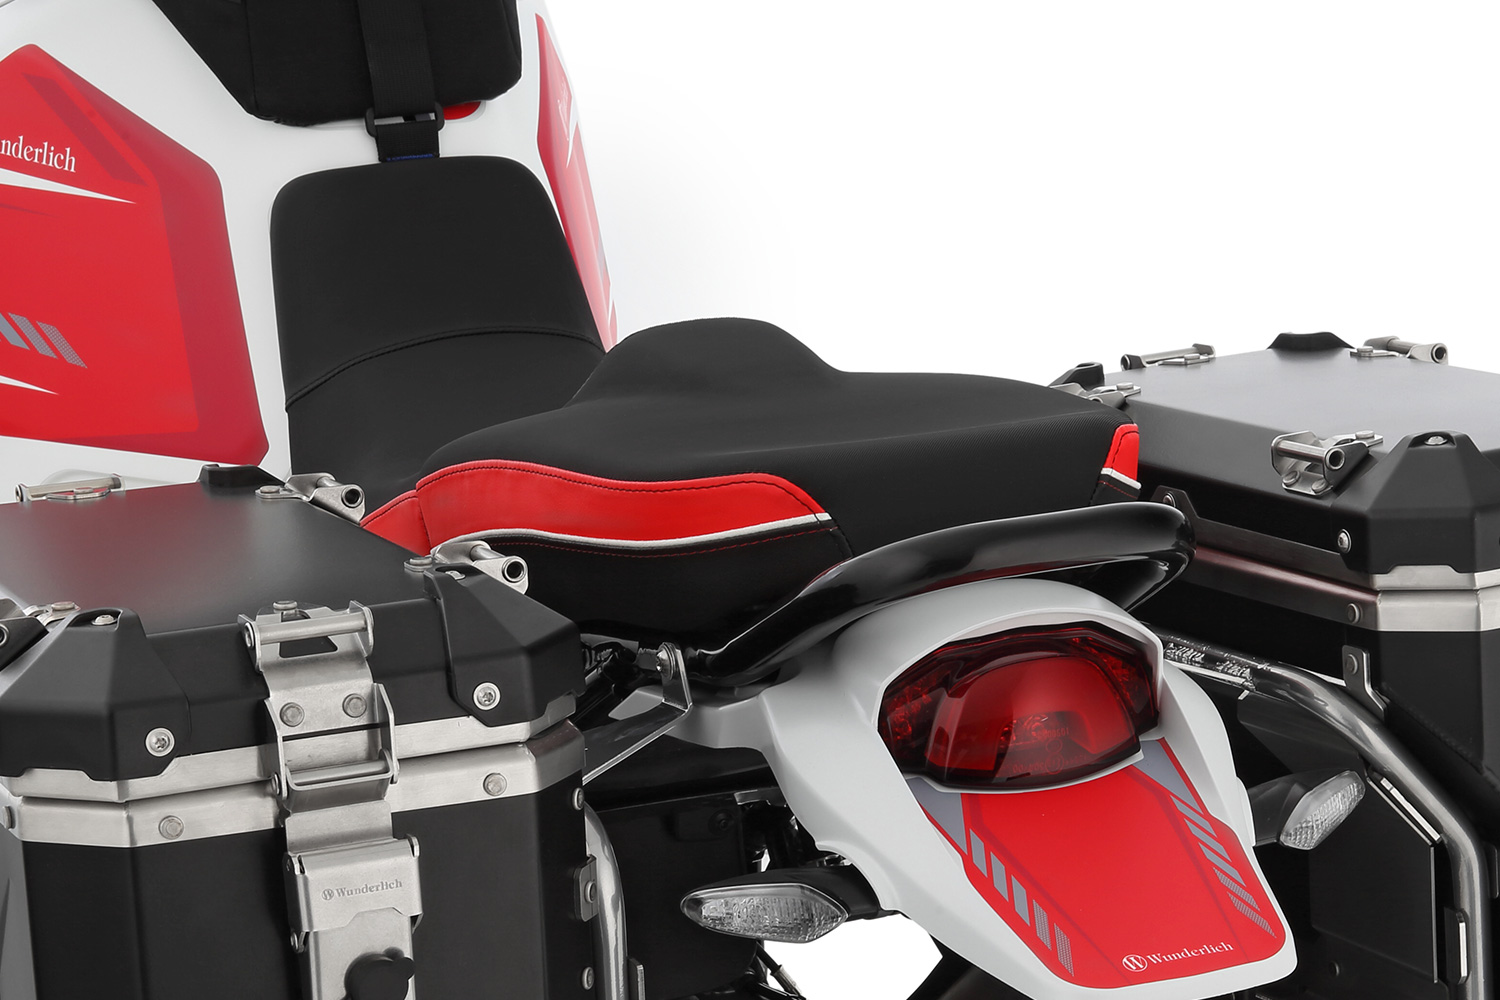 Benches for Ducati & Harley: Optimal comfort on every journey